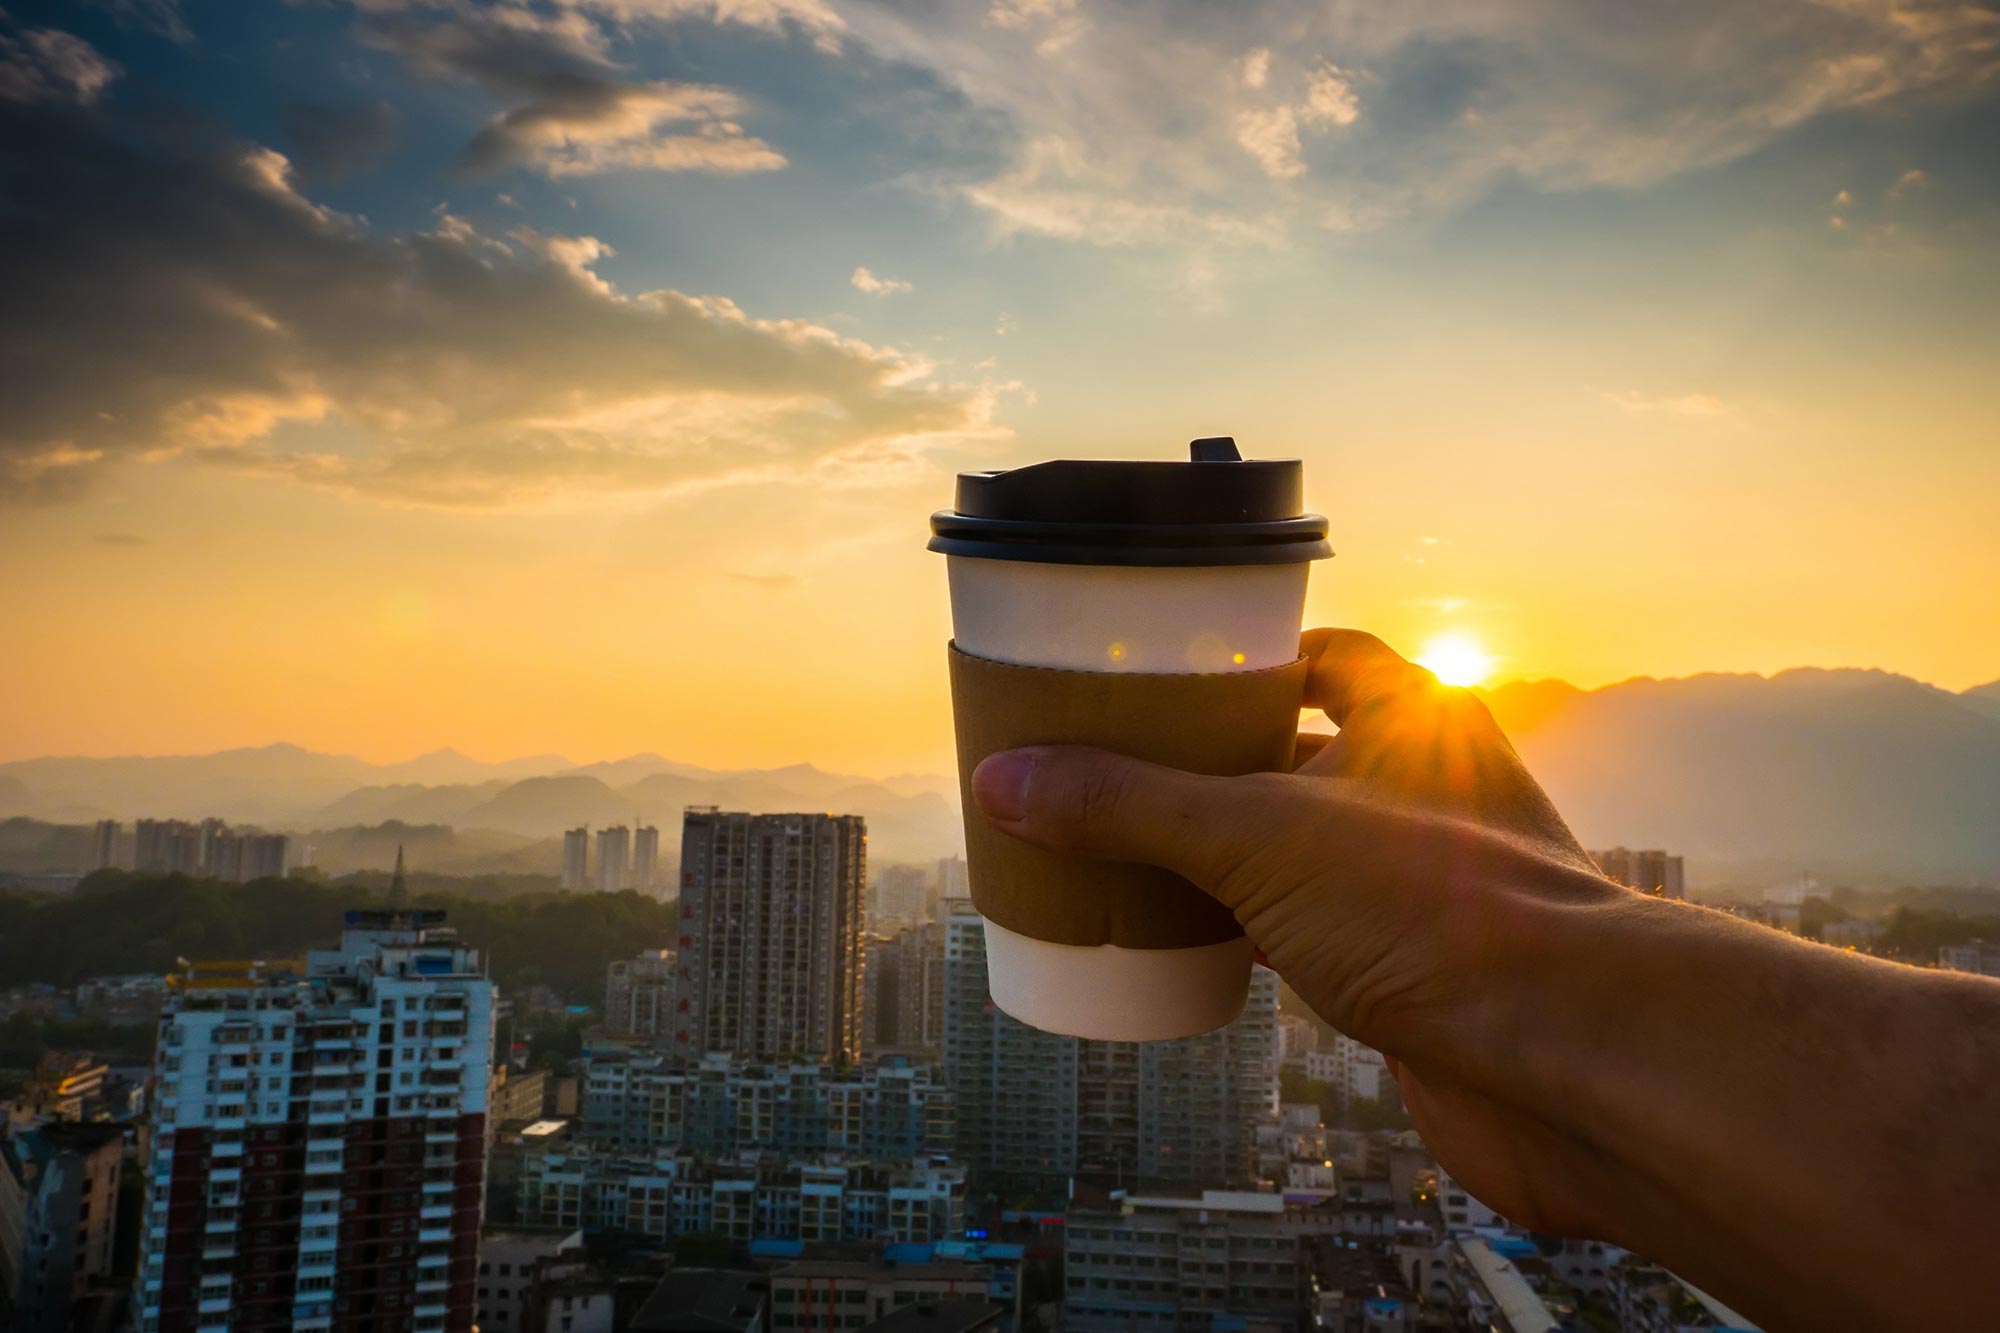 https://scitechdaily.com/images/Drinking-Coffee-Sunrise.jpg